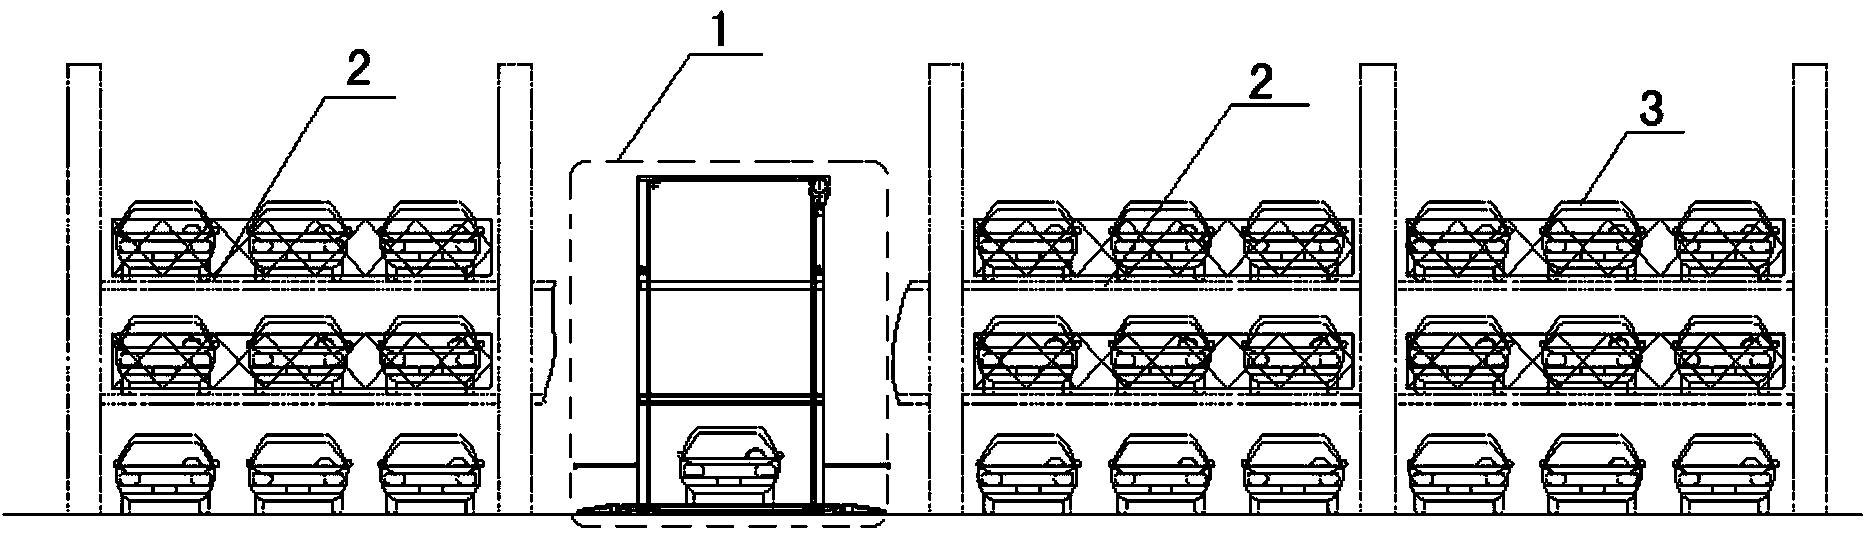 Parallel type vehicle carrying robot and parking equipment